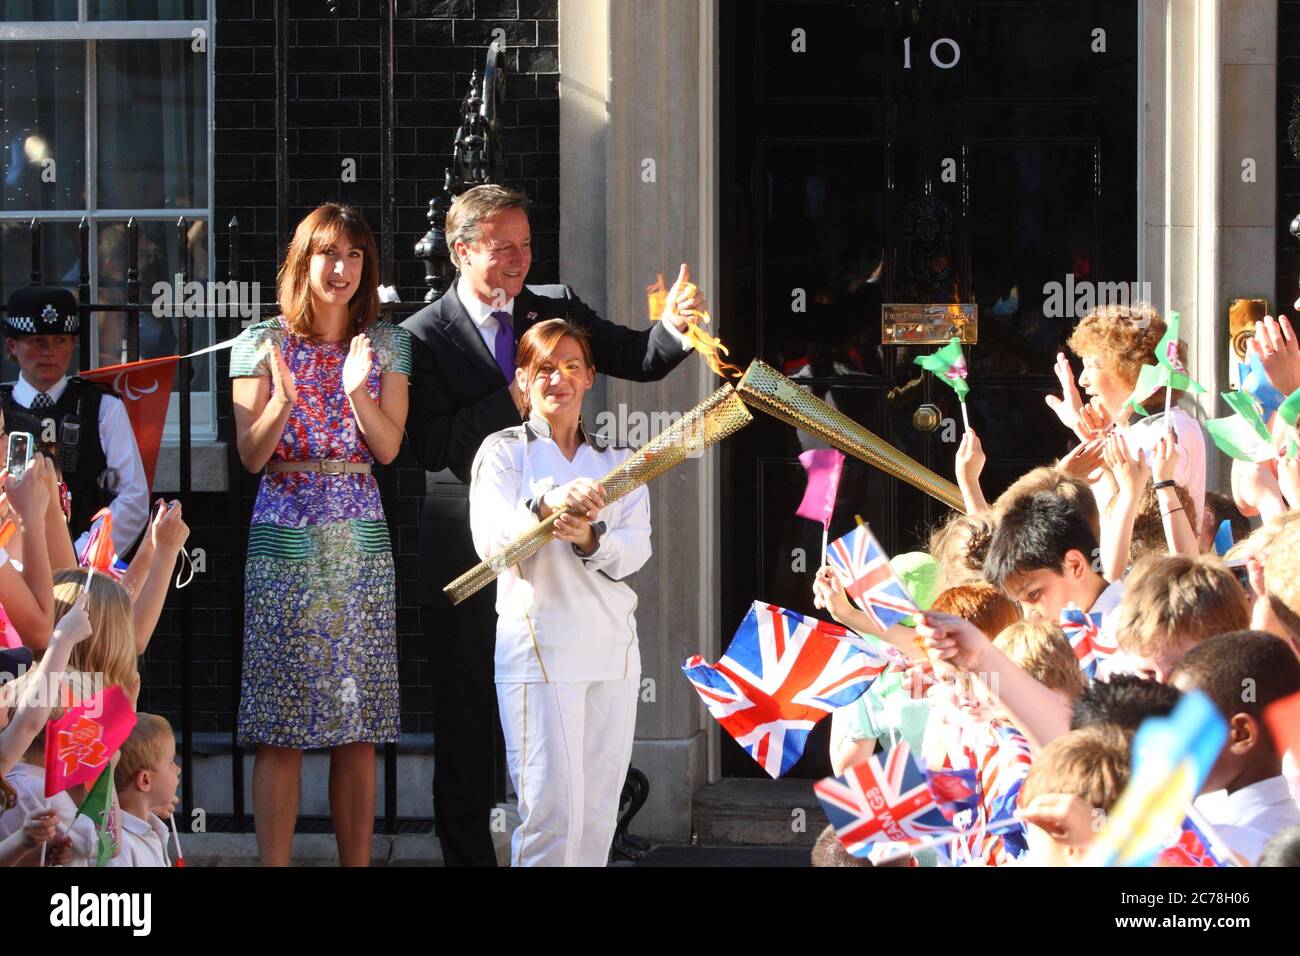 The Olympic Torch relay reaches Prime Minister David and Samantha Cameron at number 10 Downing Street carried by Ceri Davies who passed on the flame to Florence Rowe. 25 July 2012 --- Image by © Paul Cunningham Stock Photo